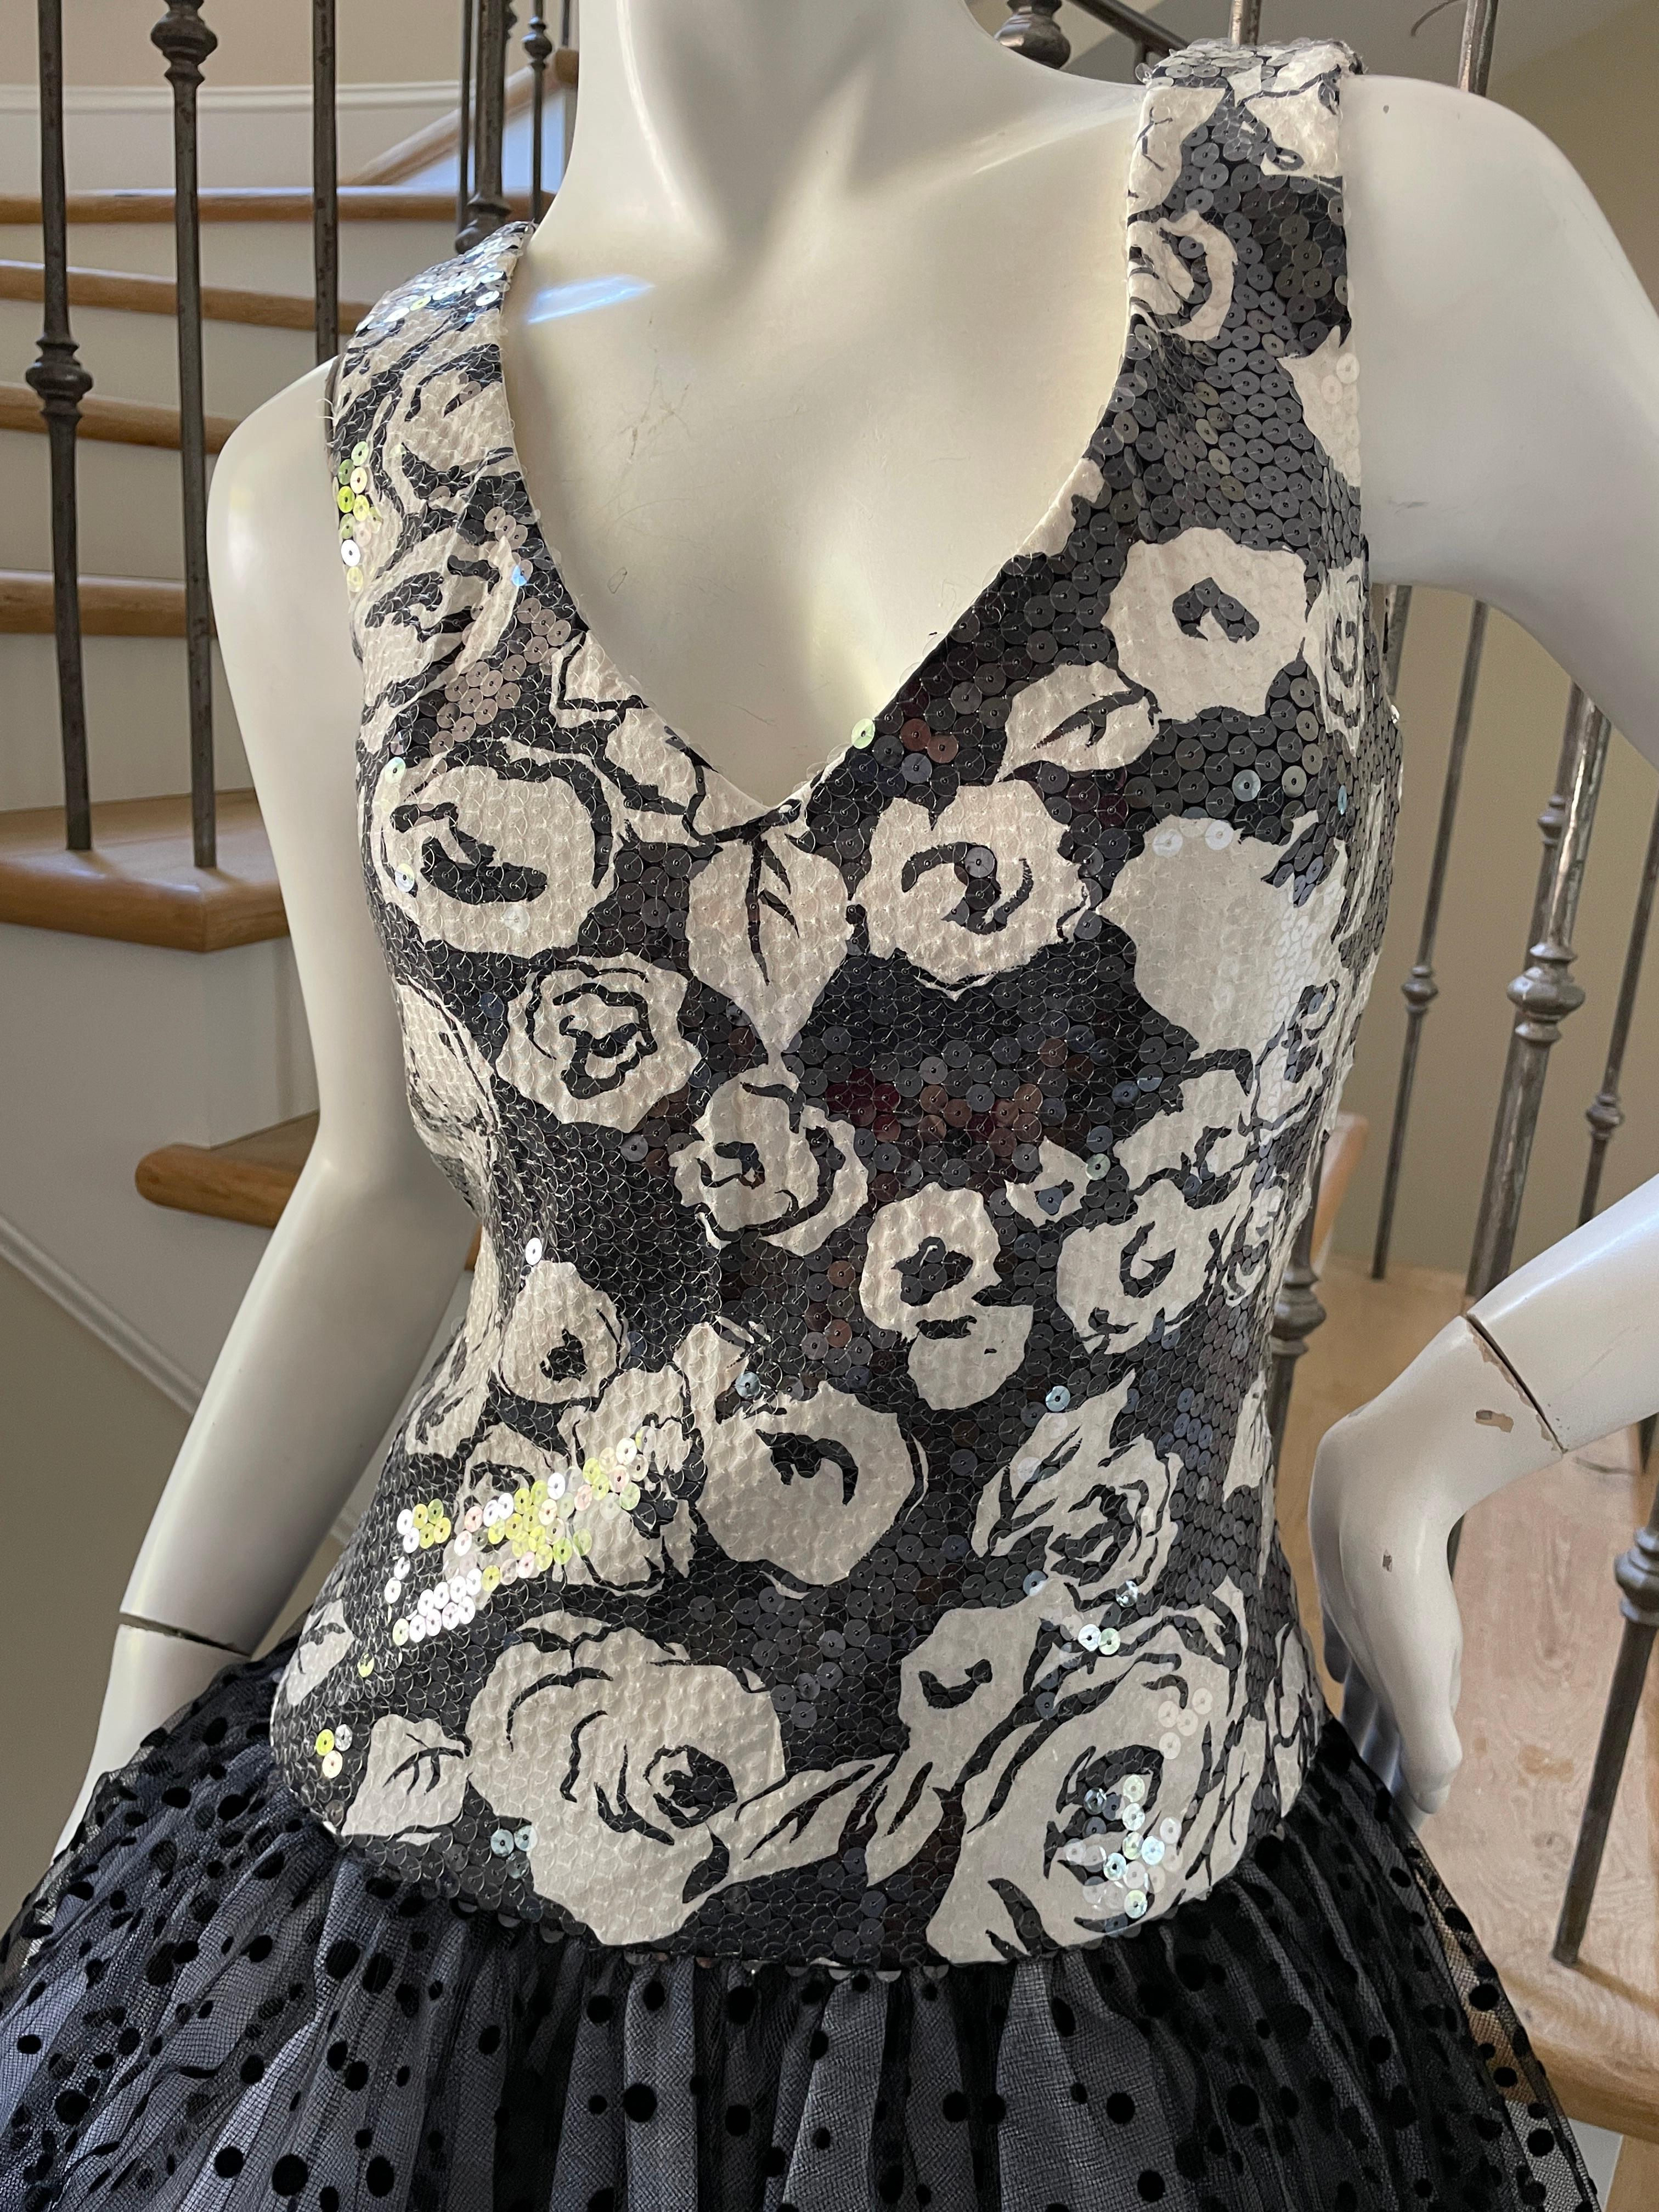 Scaasi Sequin Sleeveless Cocktail Dress w Polka Dot Petticoat Ballerina Skirt  In Excellent Condition For Sale In Cloverdale, CA